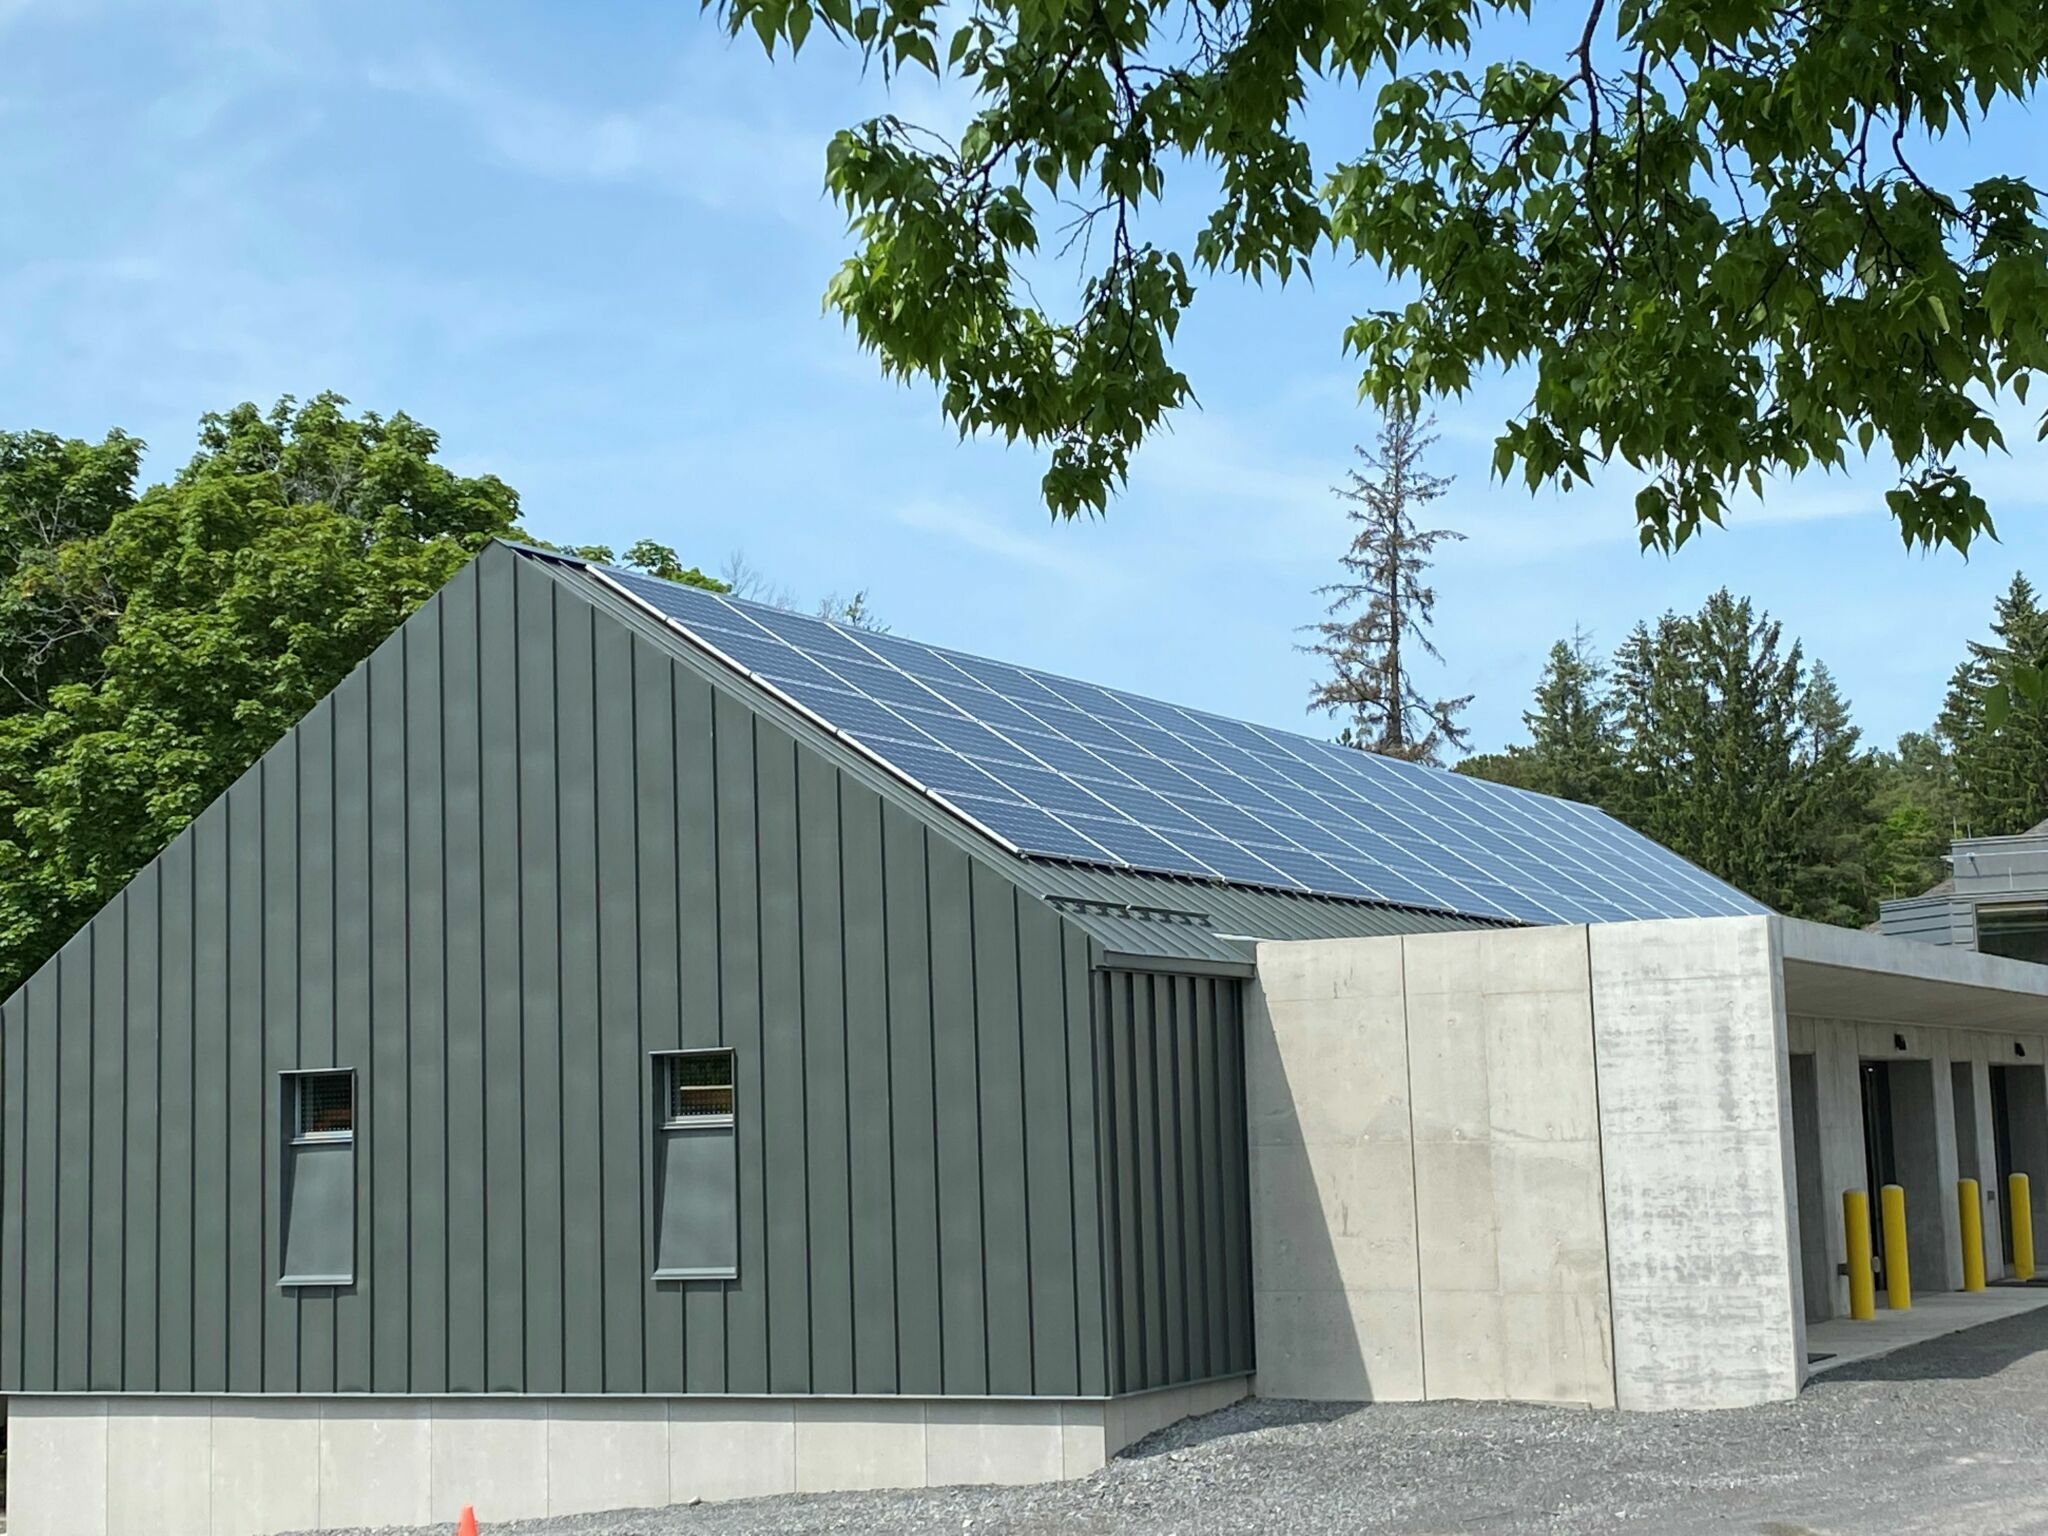 Zero-carbon building with solar panels on the roof.